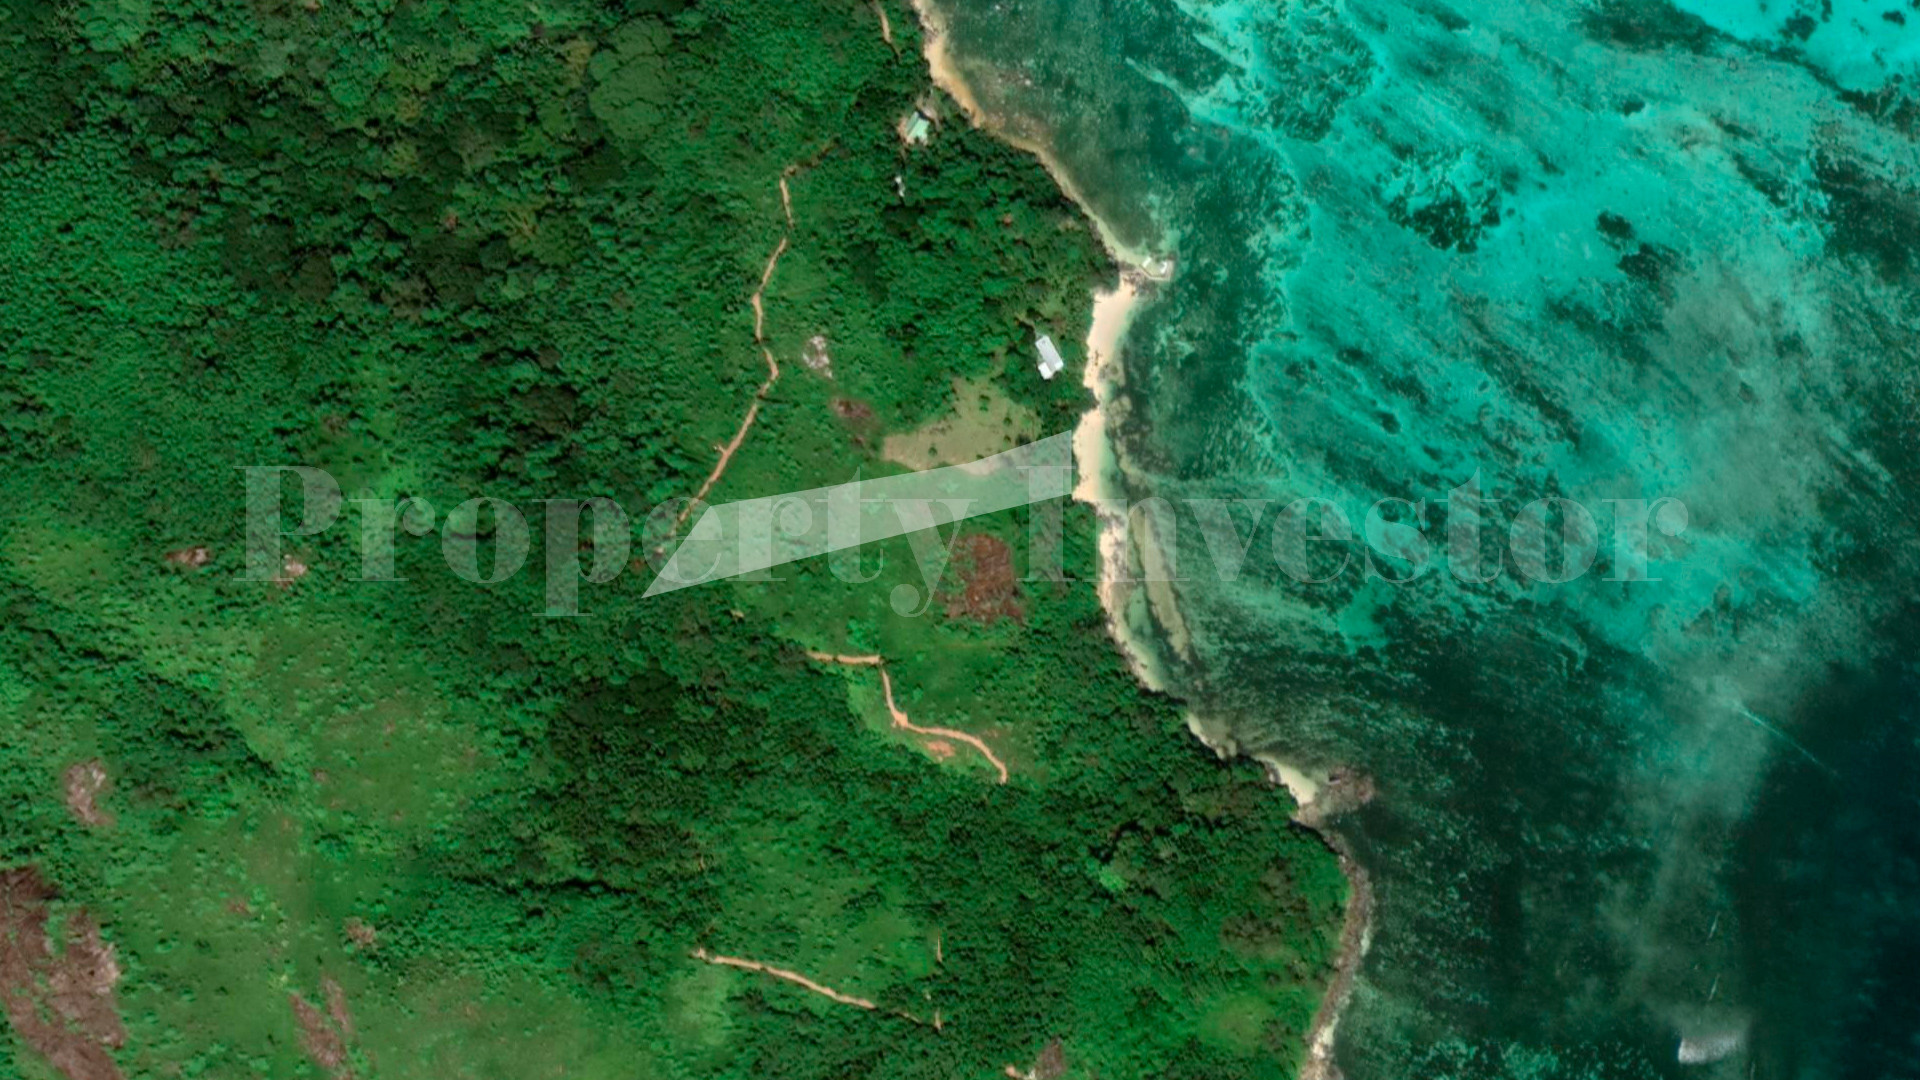 9,700 m² Lot for Tourism Development with 30 Metres of Beach Frontage for Sale on Cerf Island, Seychelles